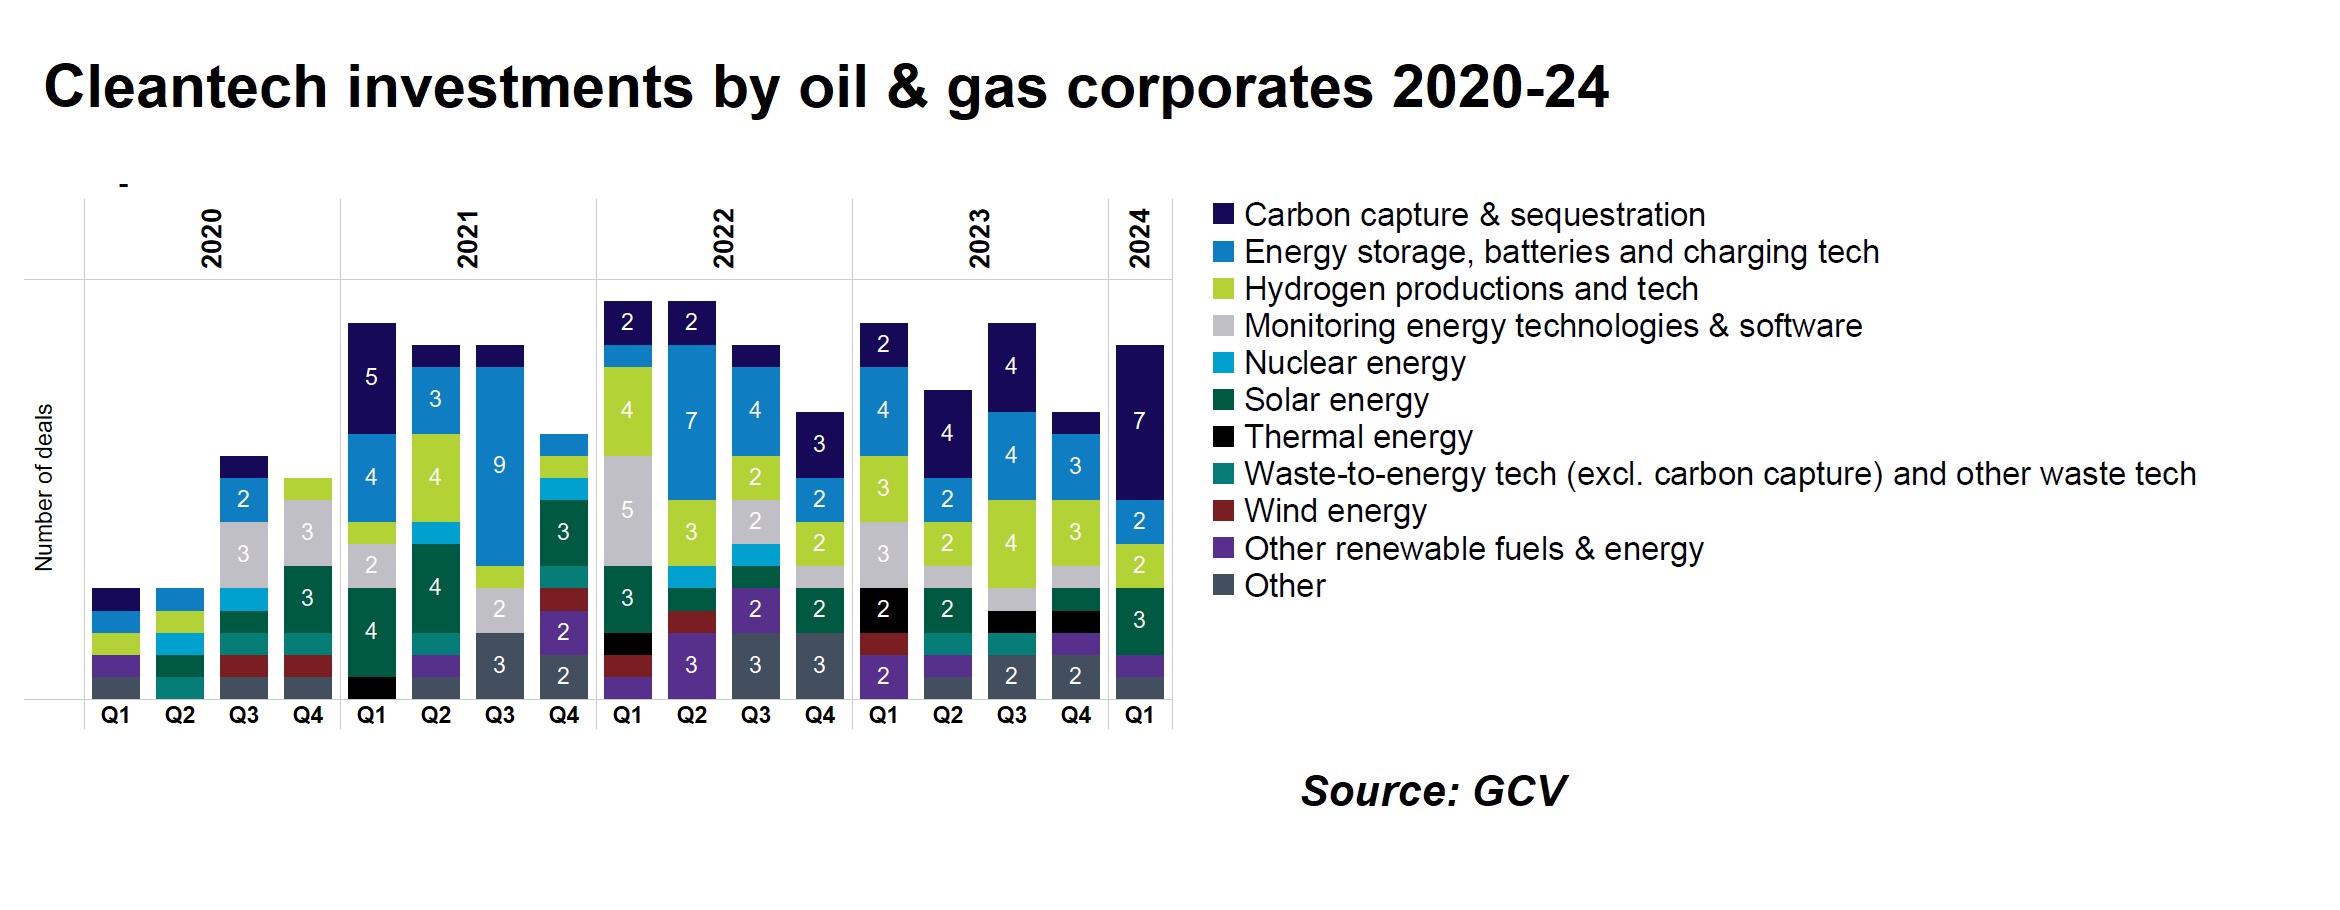 Cleantech investments by oil & gas corporates 2020-24. Source: GCV